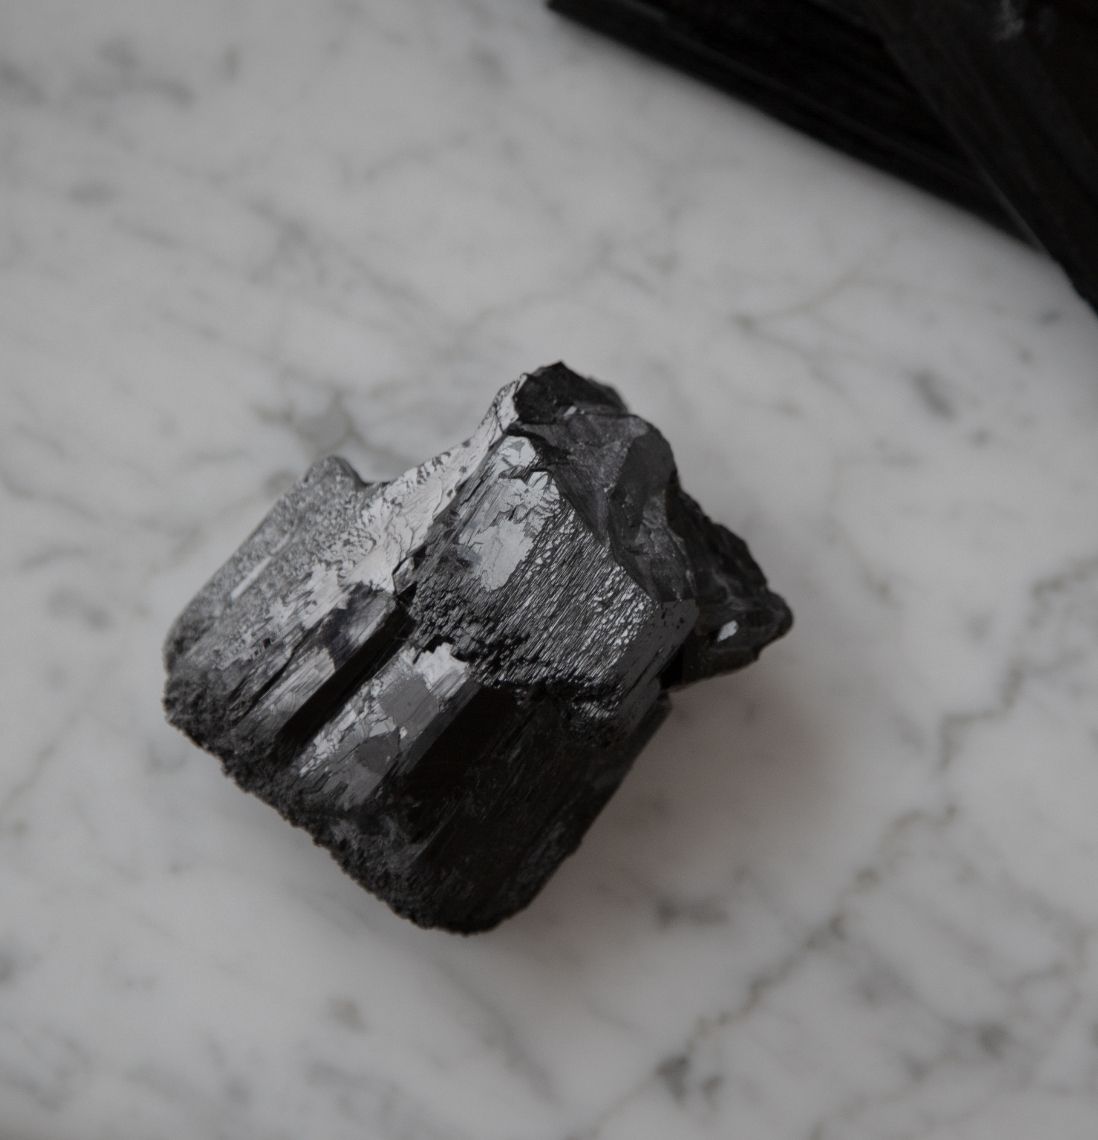 A large black tourmaline on a beautiful grey marble surface